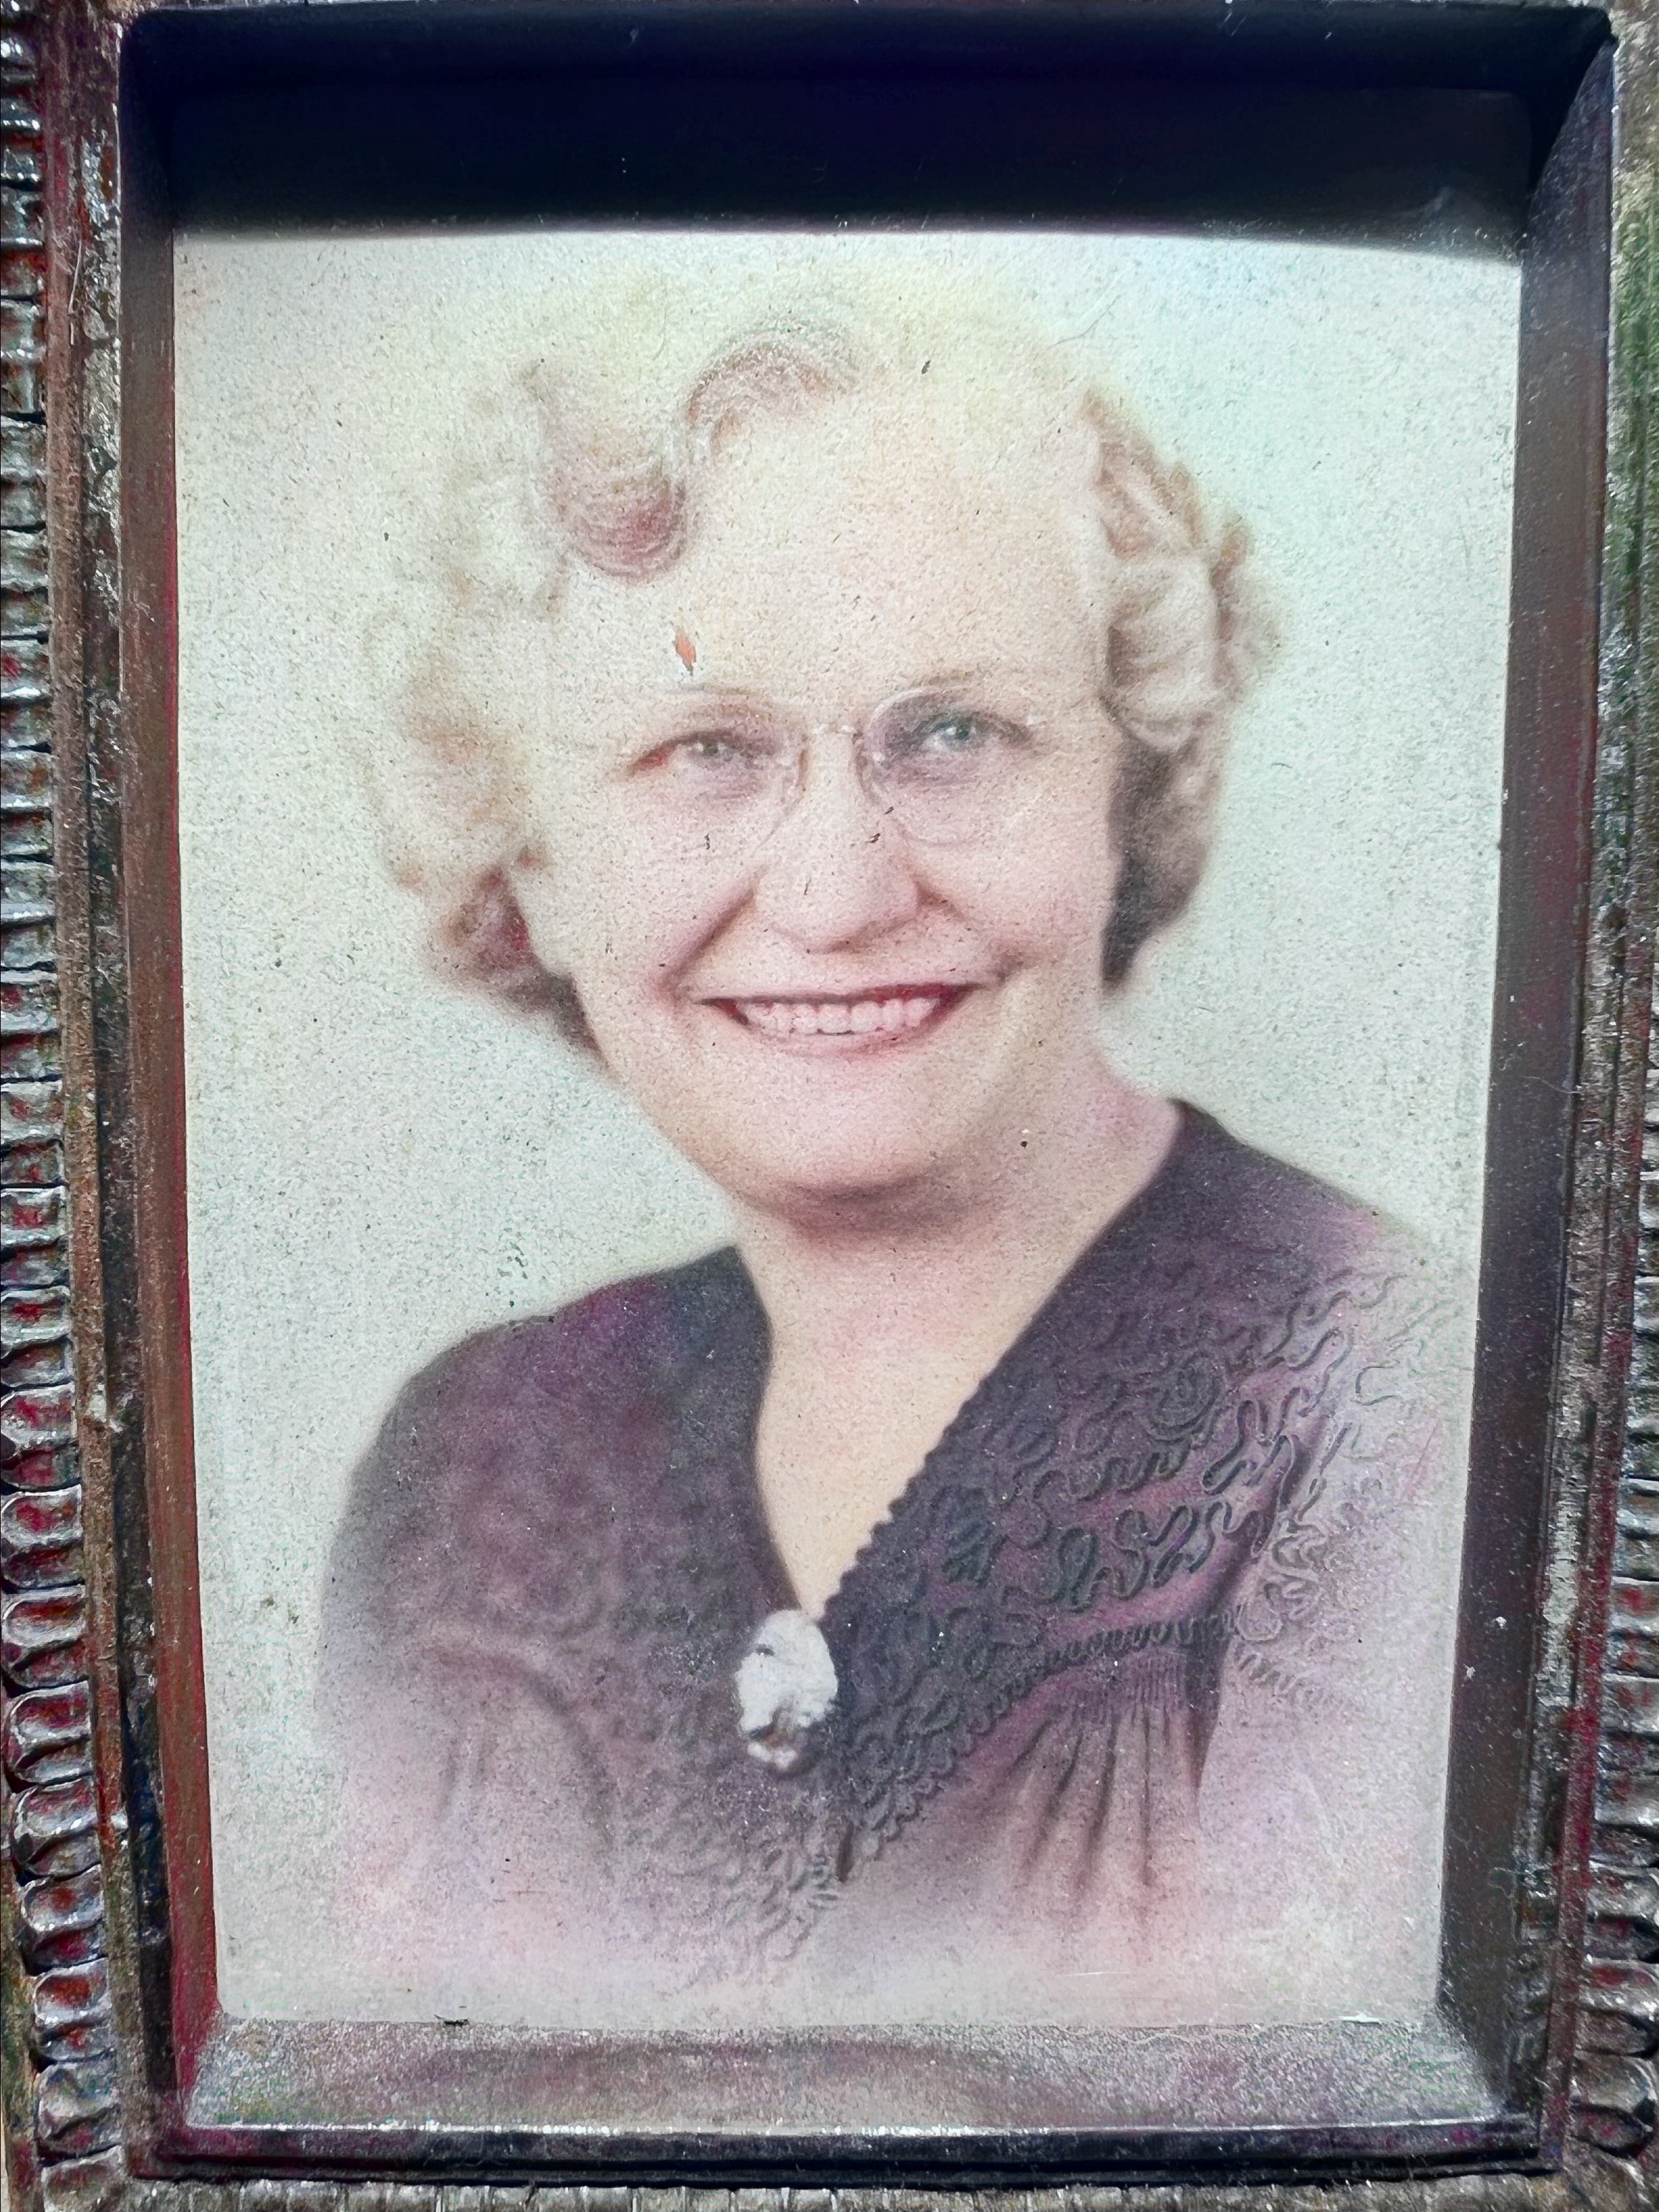 This is my husband‘s grandmother. His grandparents raised him in 1969 while crossing a street she fell and her husband went back to help her up in a car hit both of them and killed them both.